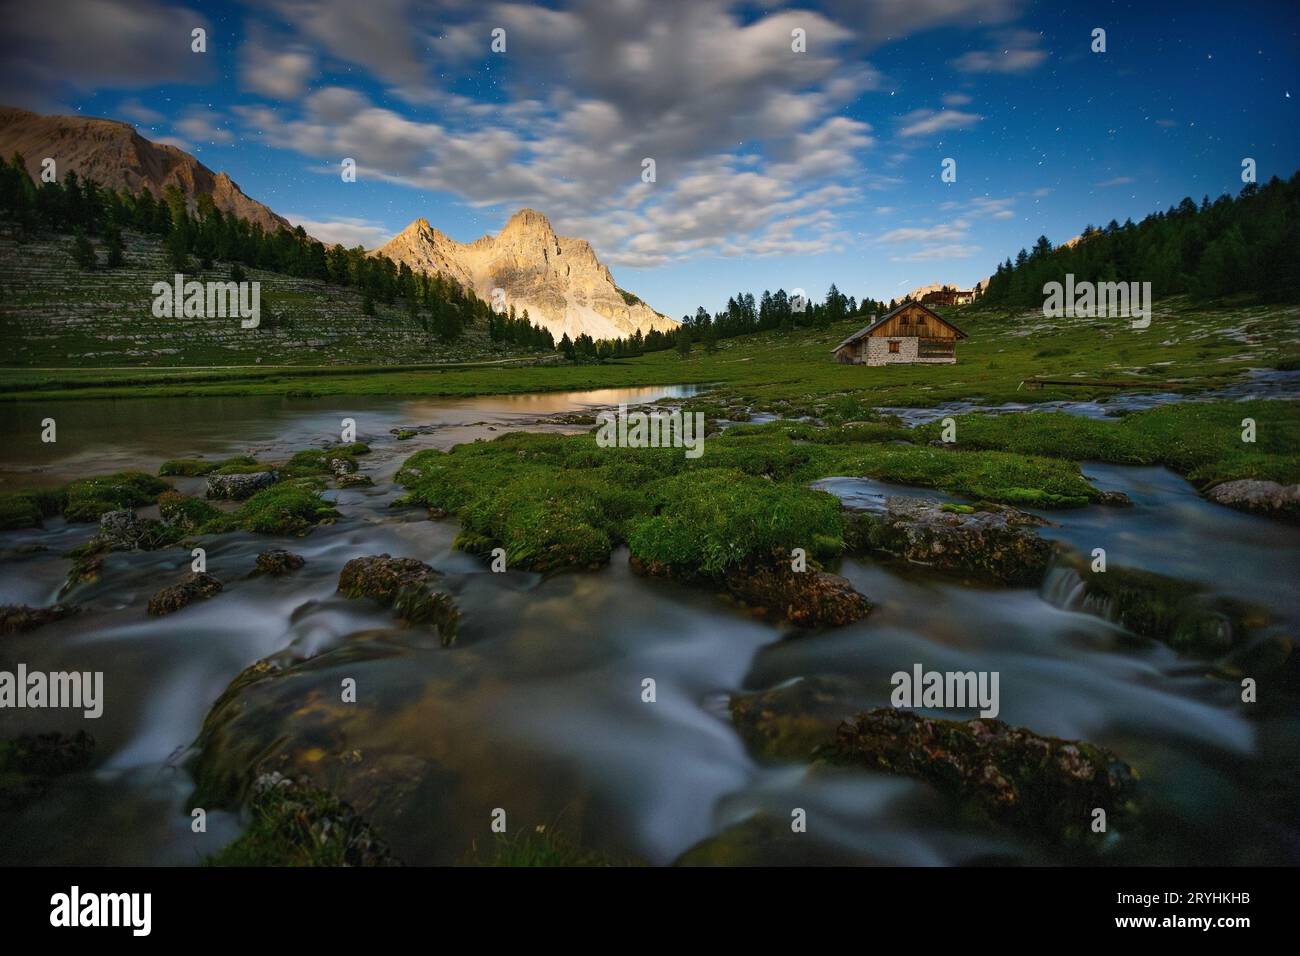 Moonlight at night in the Fanes valley. The Dolomites. Stream water, alpine meadow. Furcia dai Fers mountain peak. Italian Alps. Europe. Stock Photo